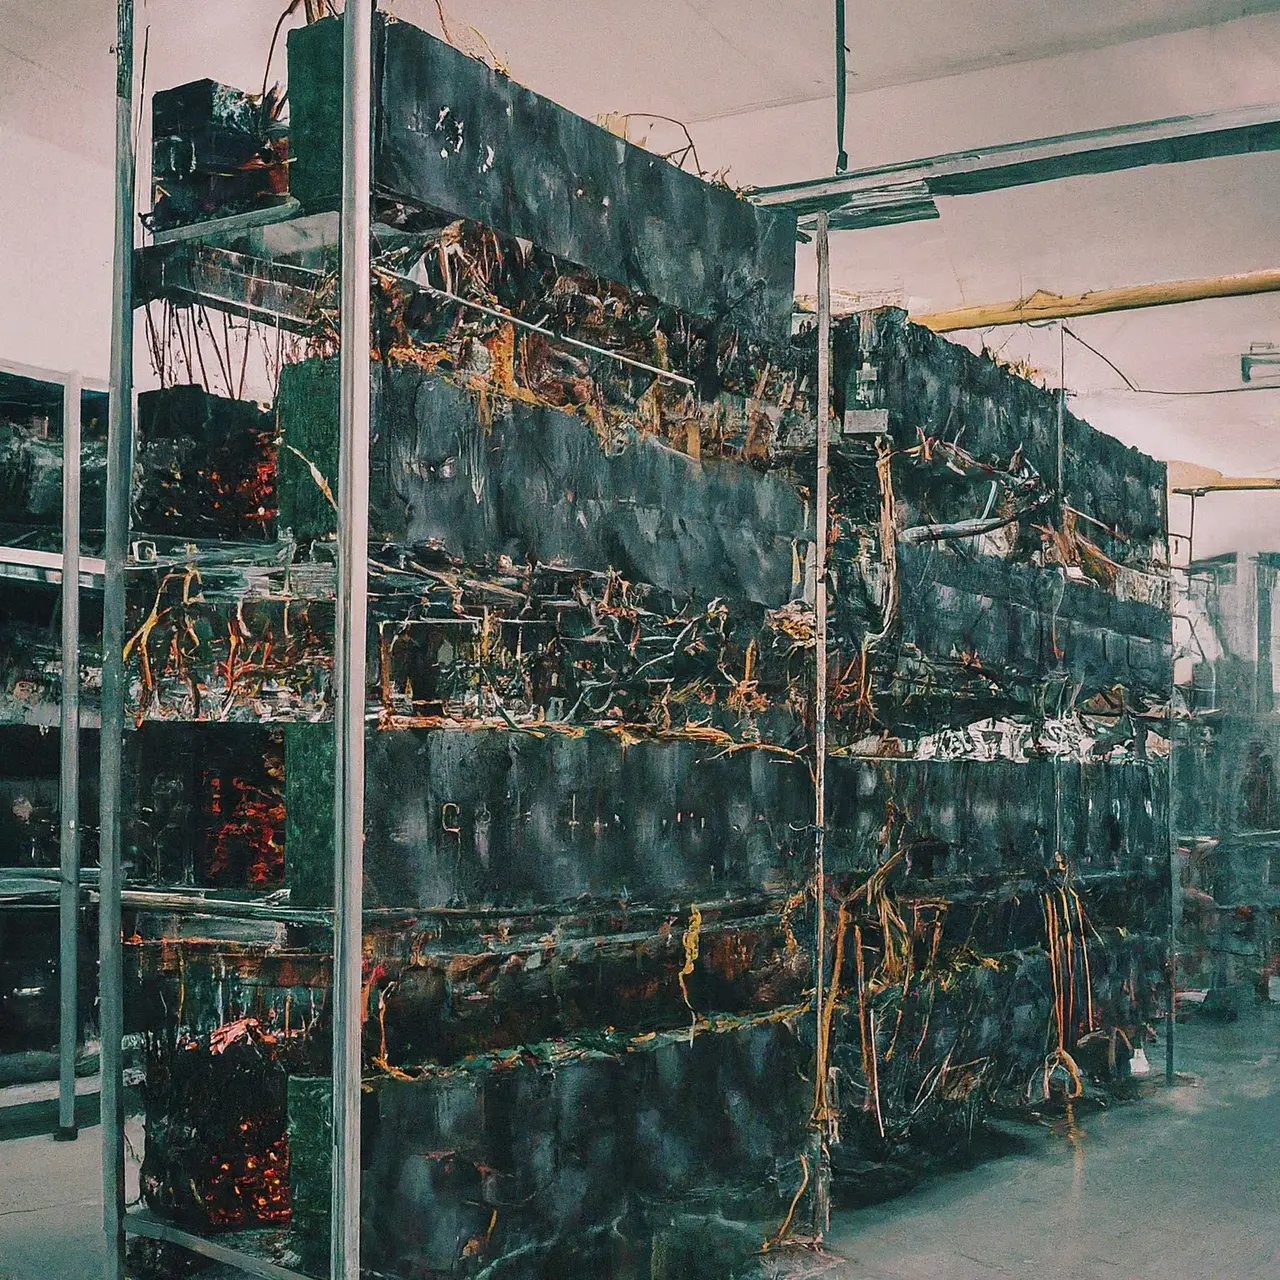 Rows of cryptocurrency mining rigs in a solar-powered facility. 35mm stock photo